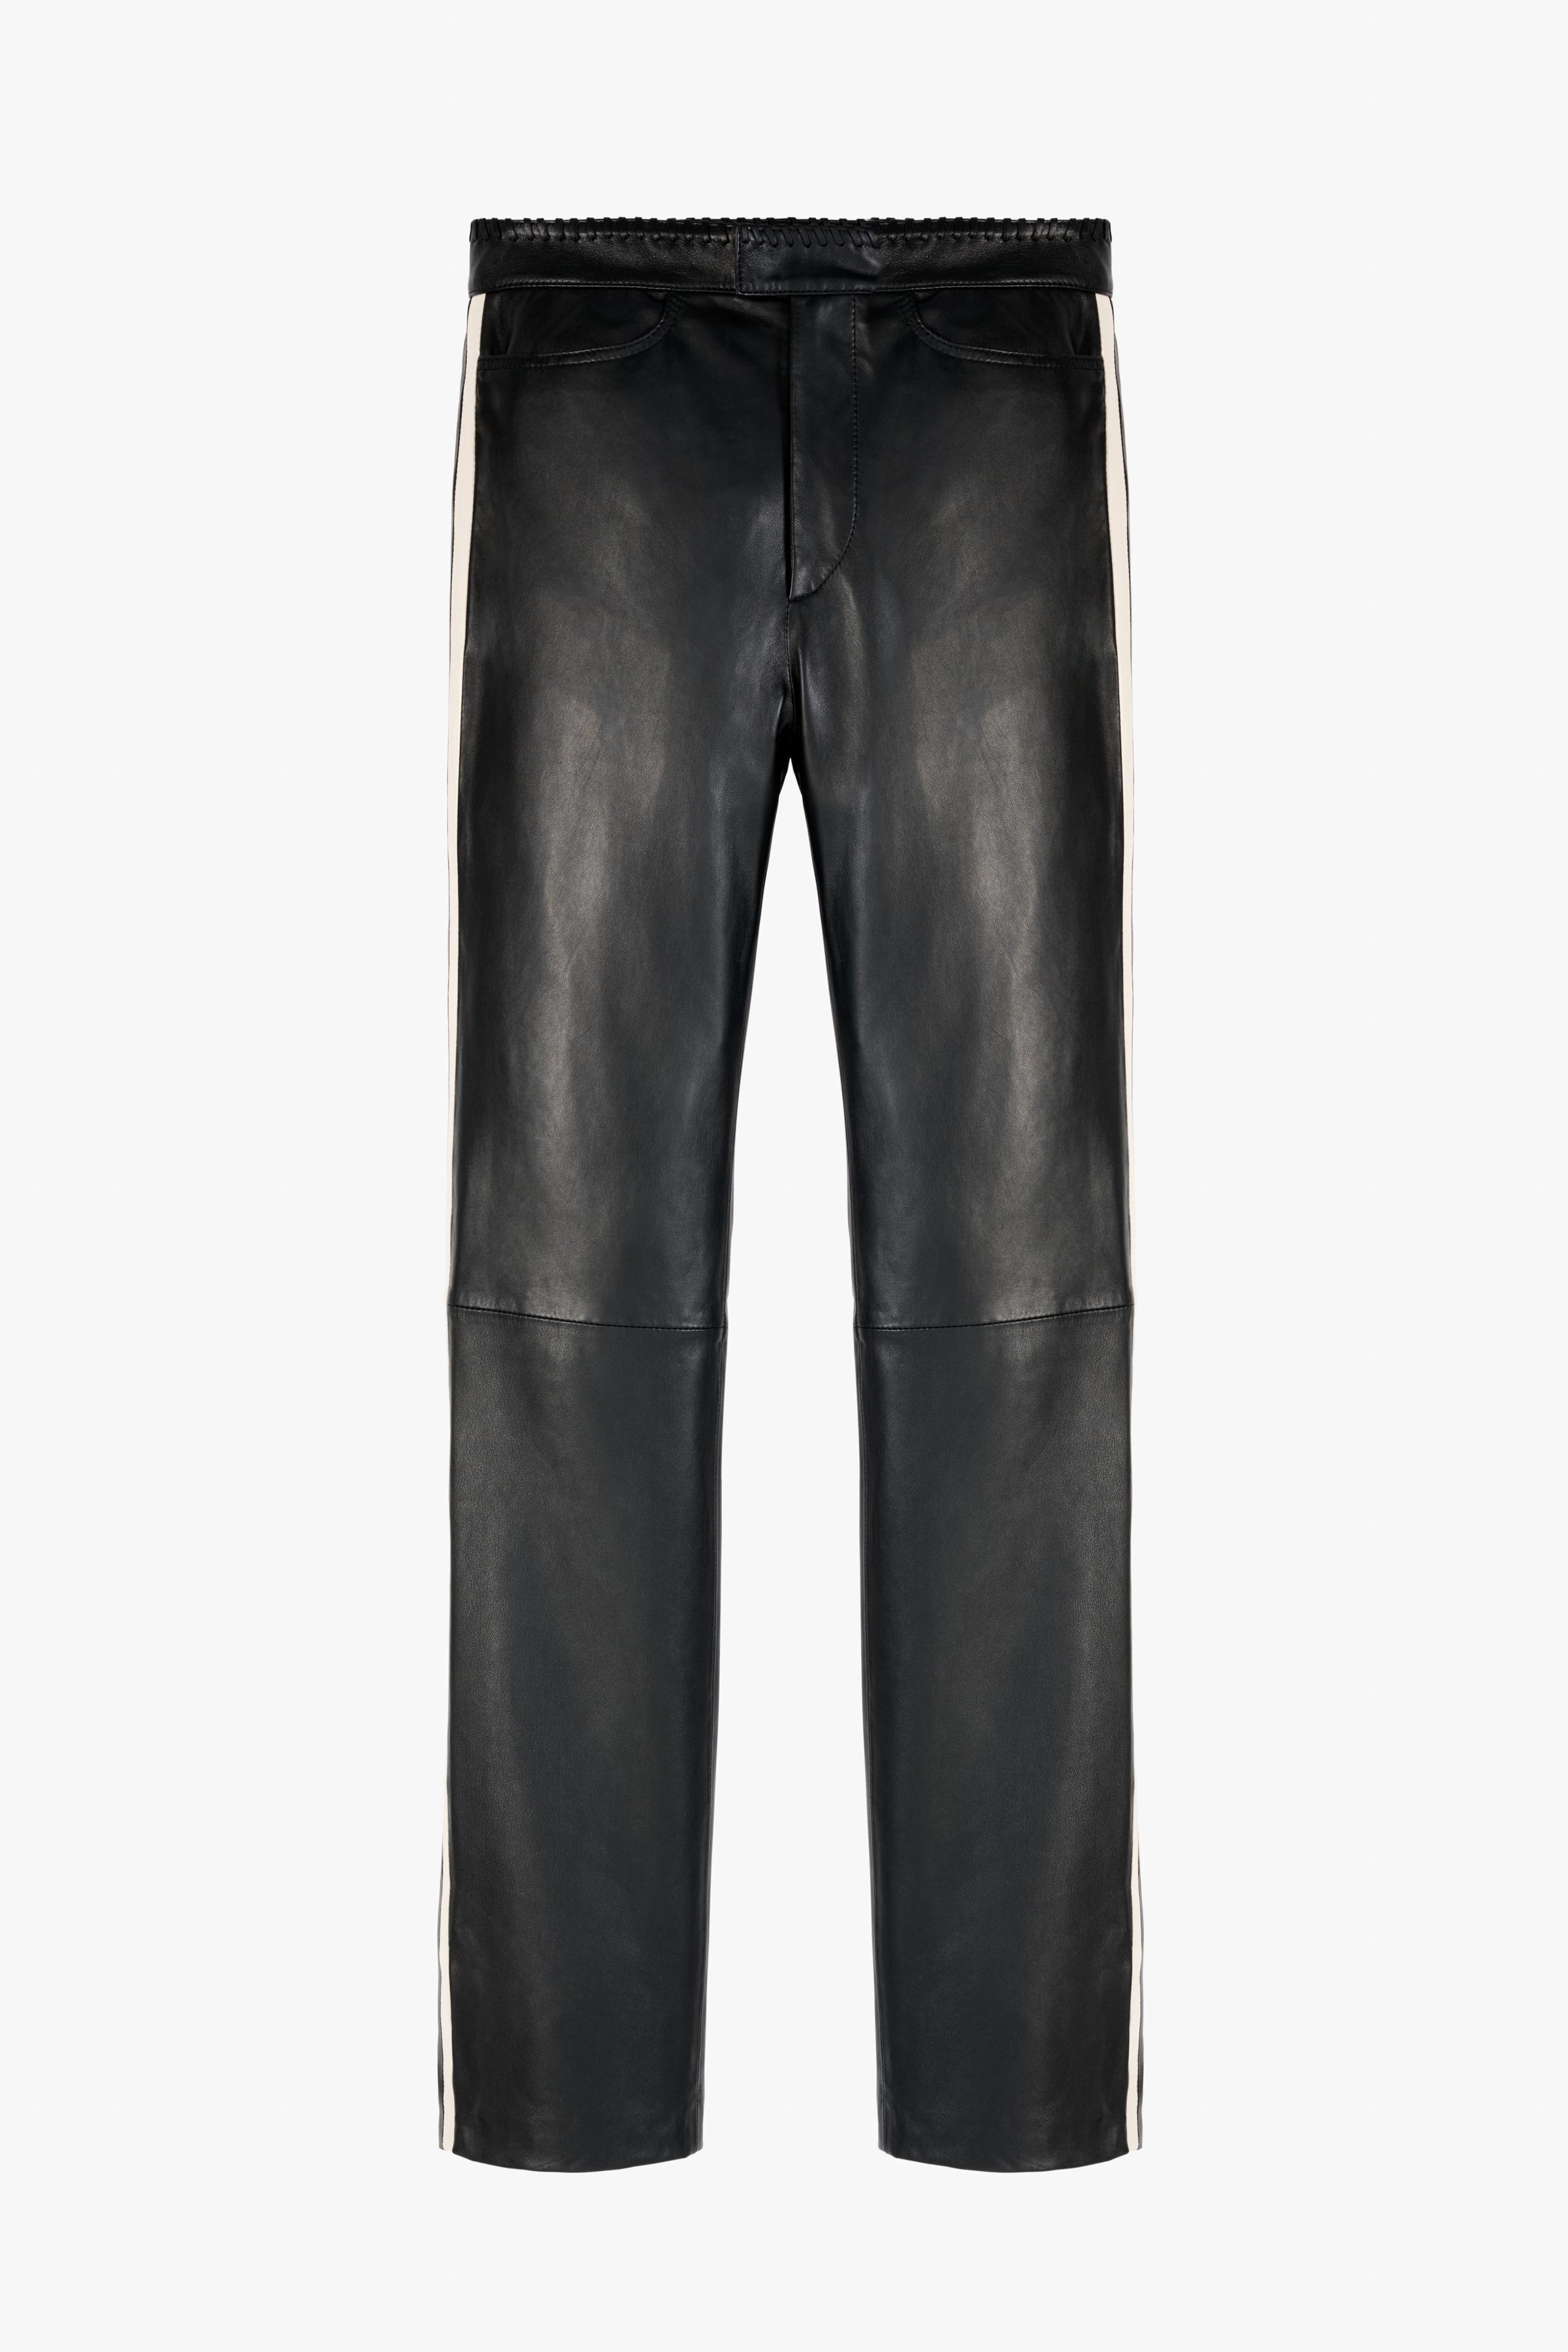 SKINNY LEATHER PANTS LIMITED EDITION - Black